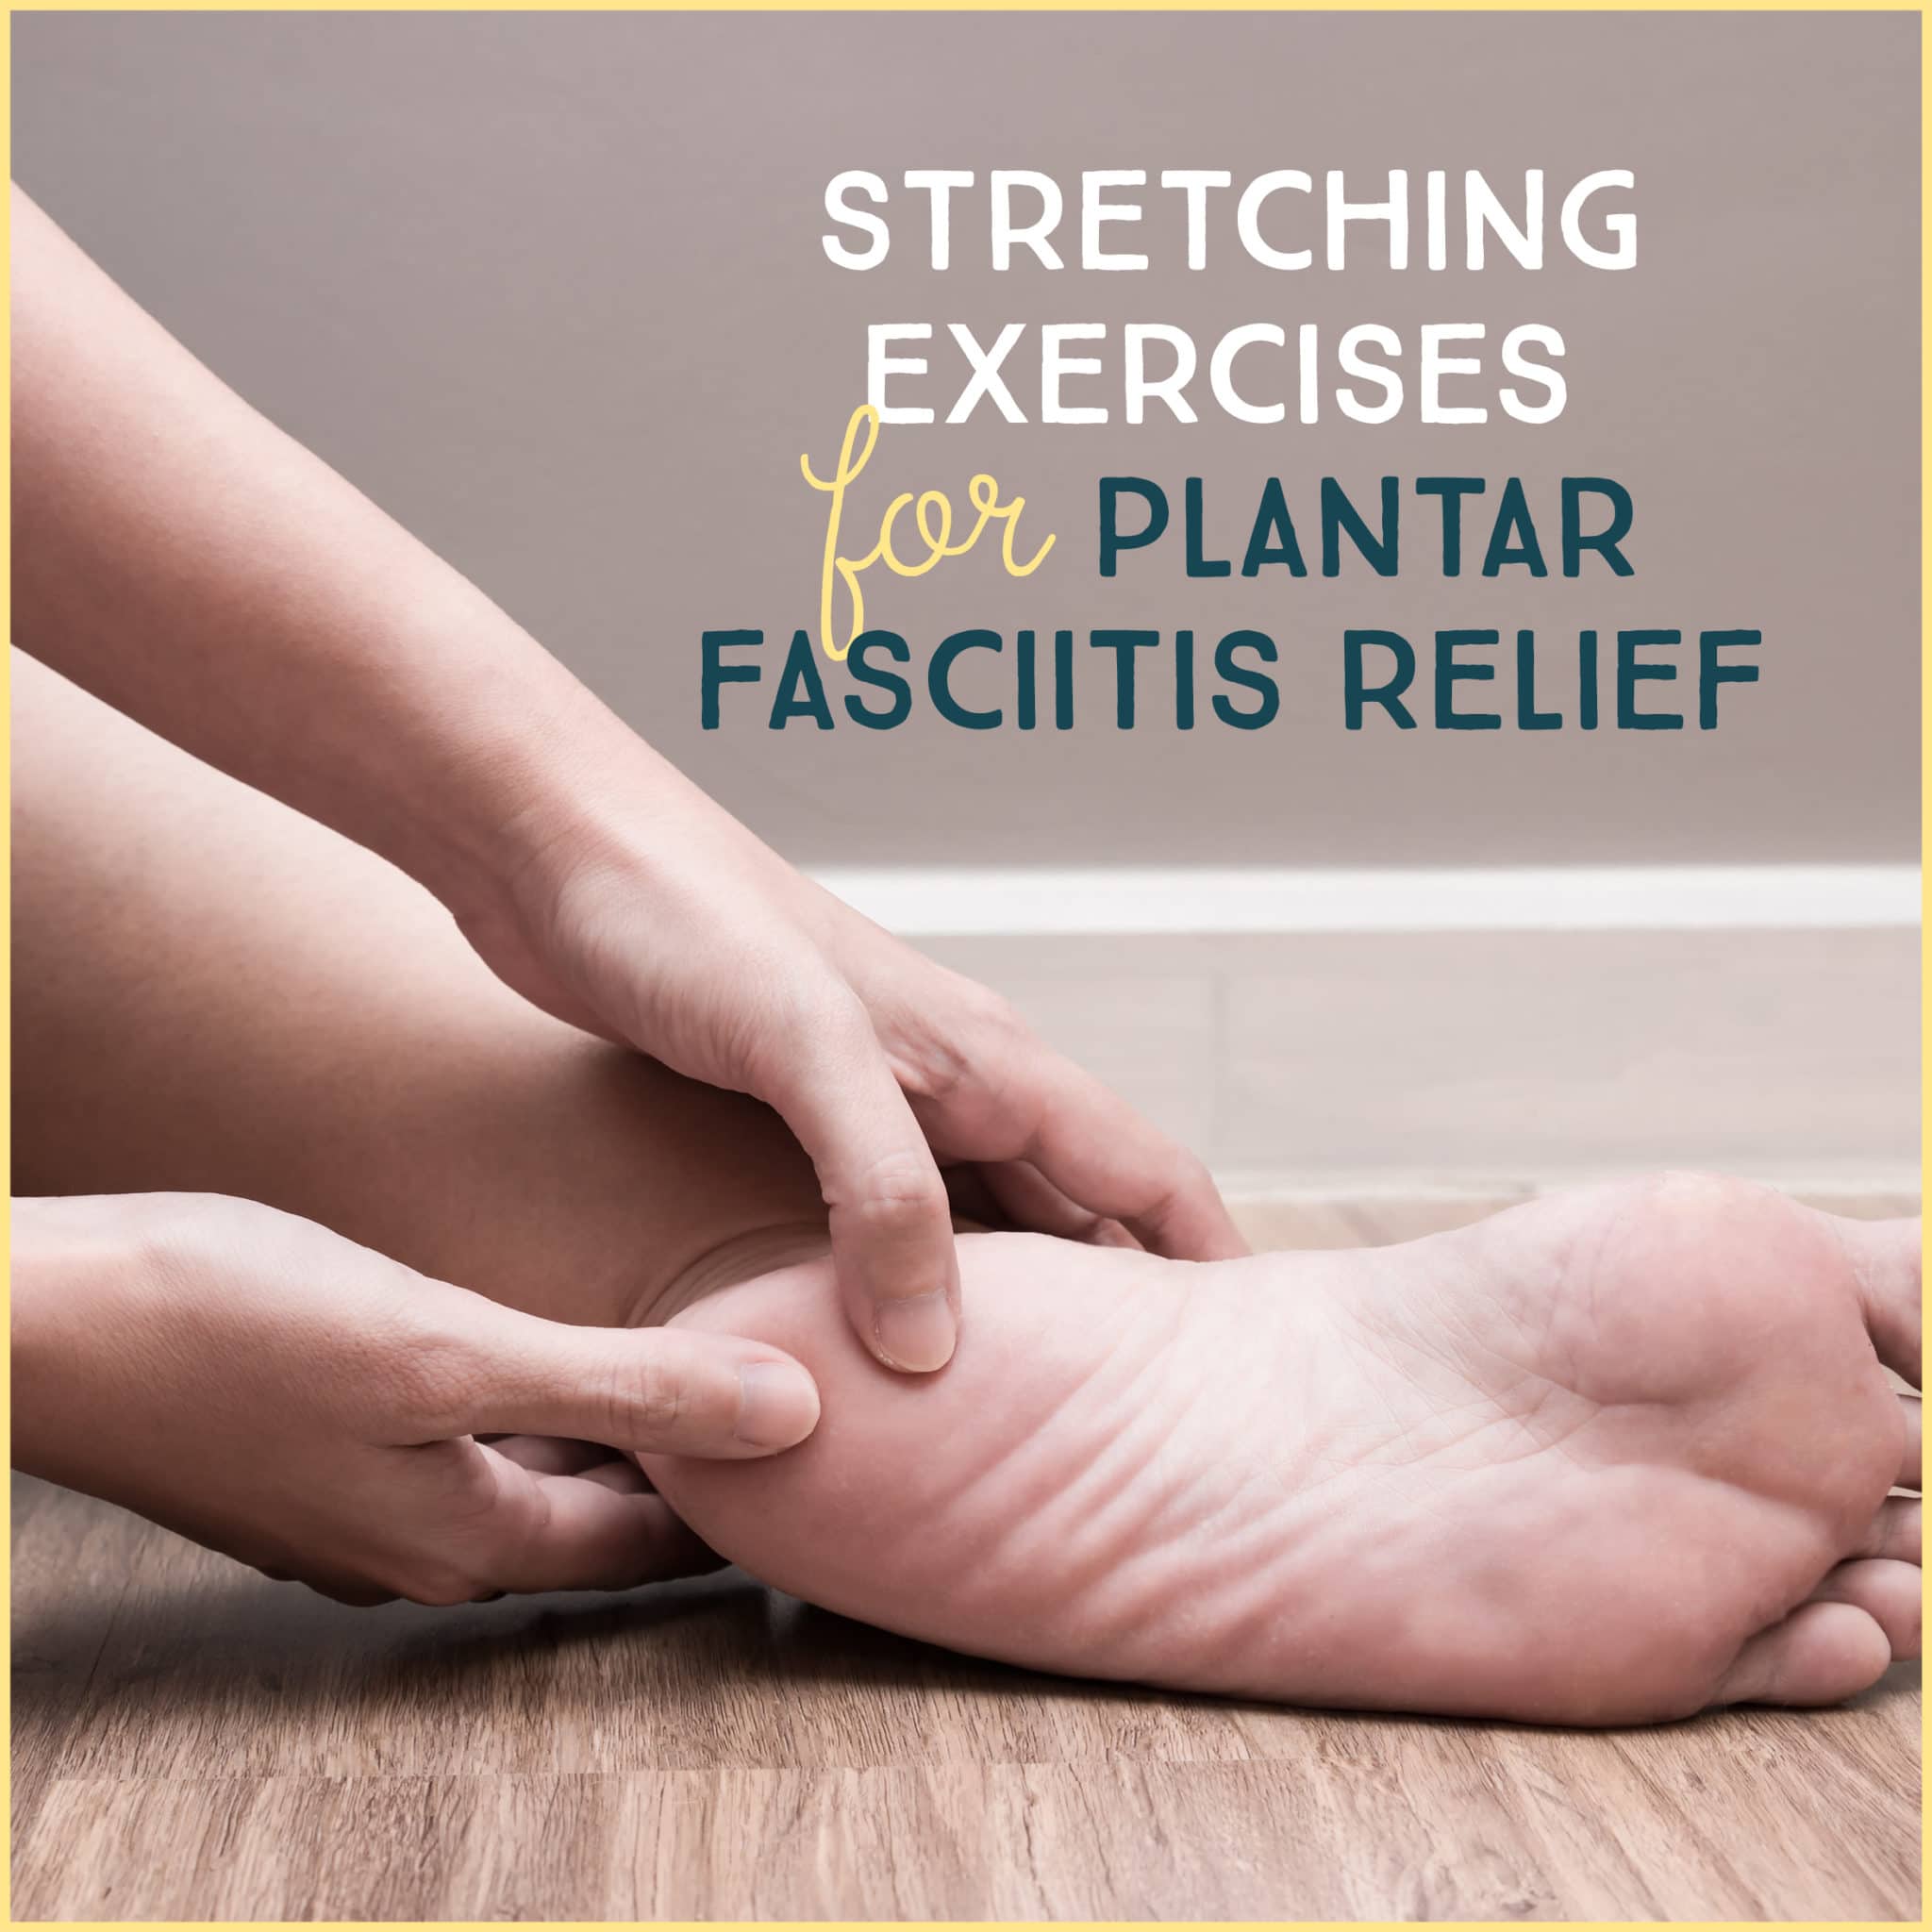 Benefits of Stretching the Arch of the Foot